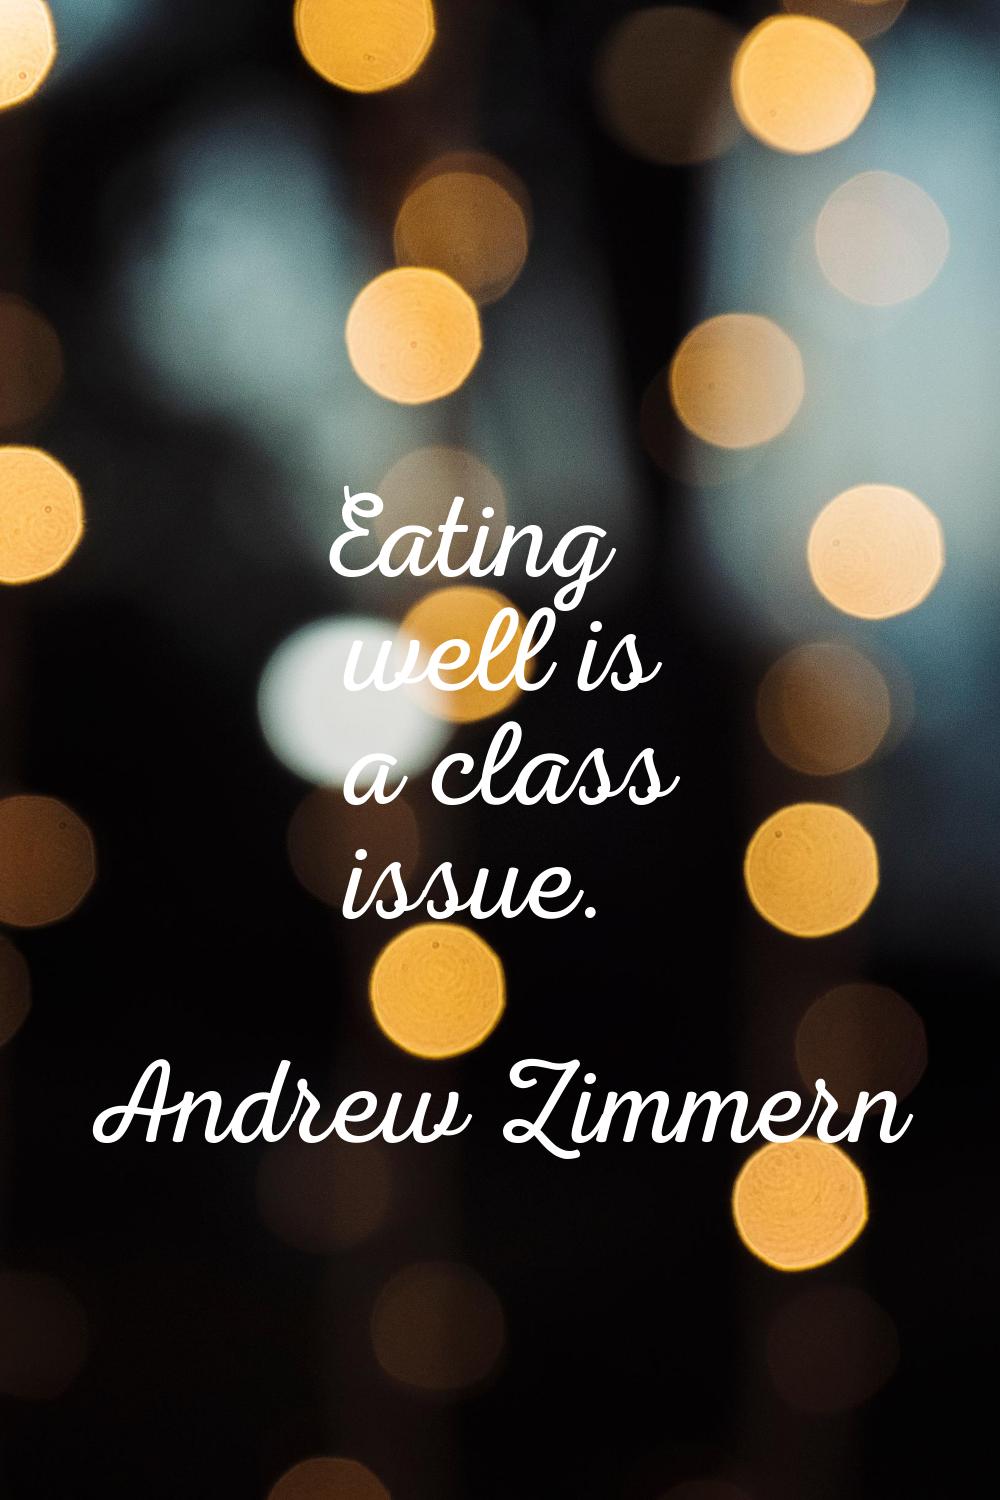 Eating well is a class issue.